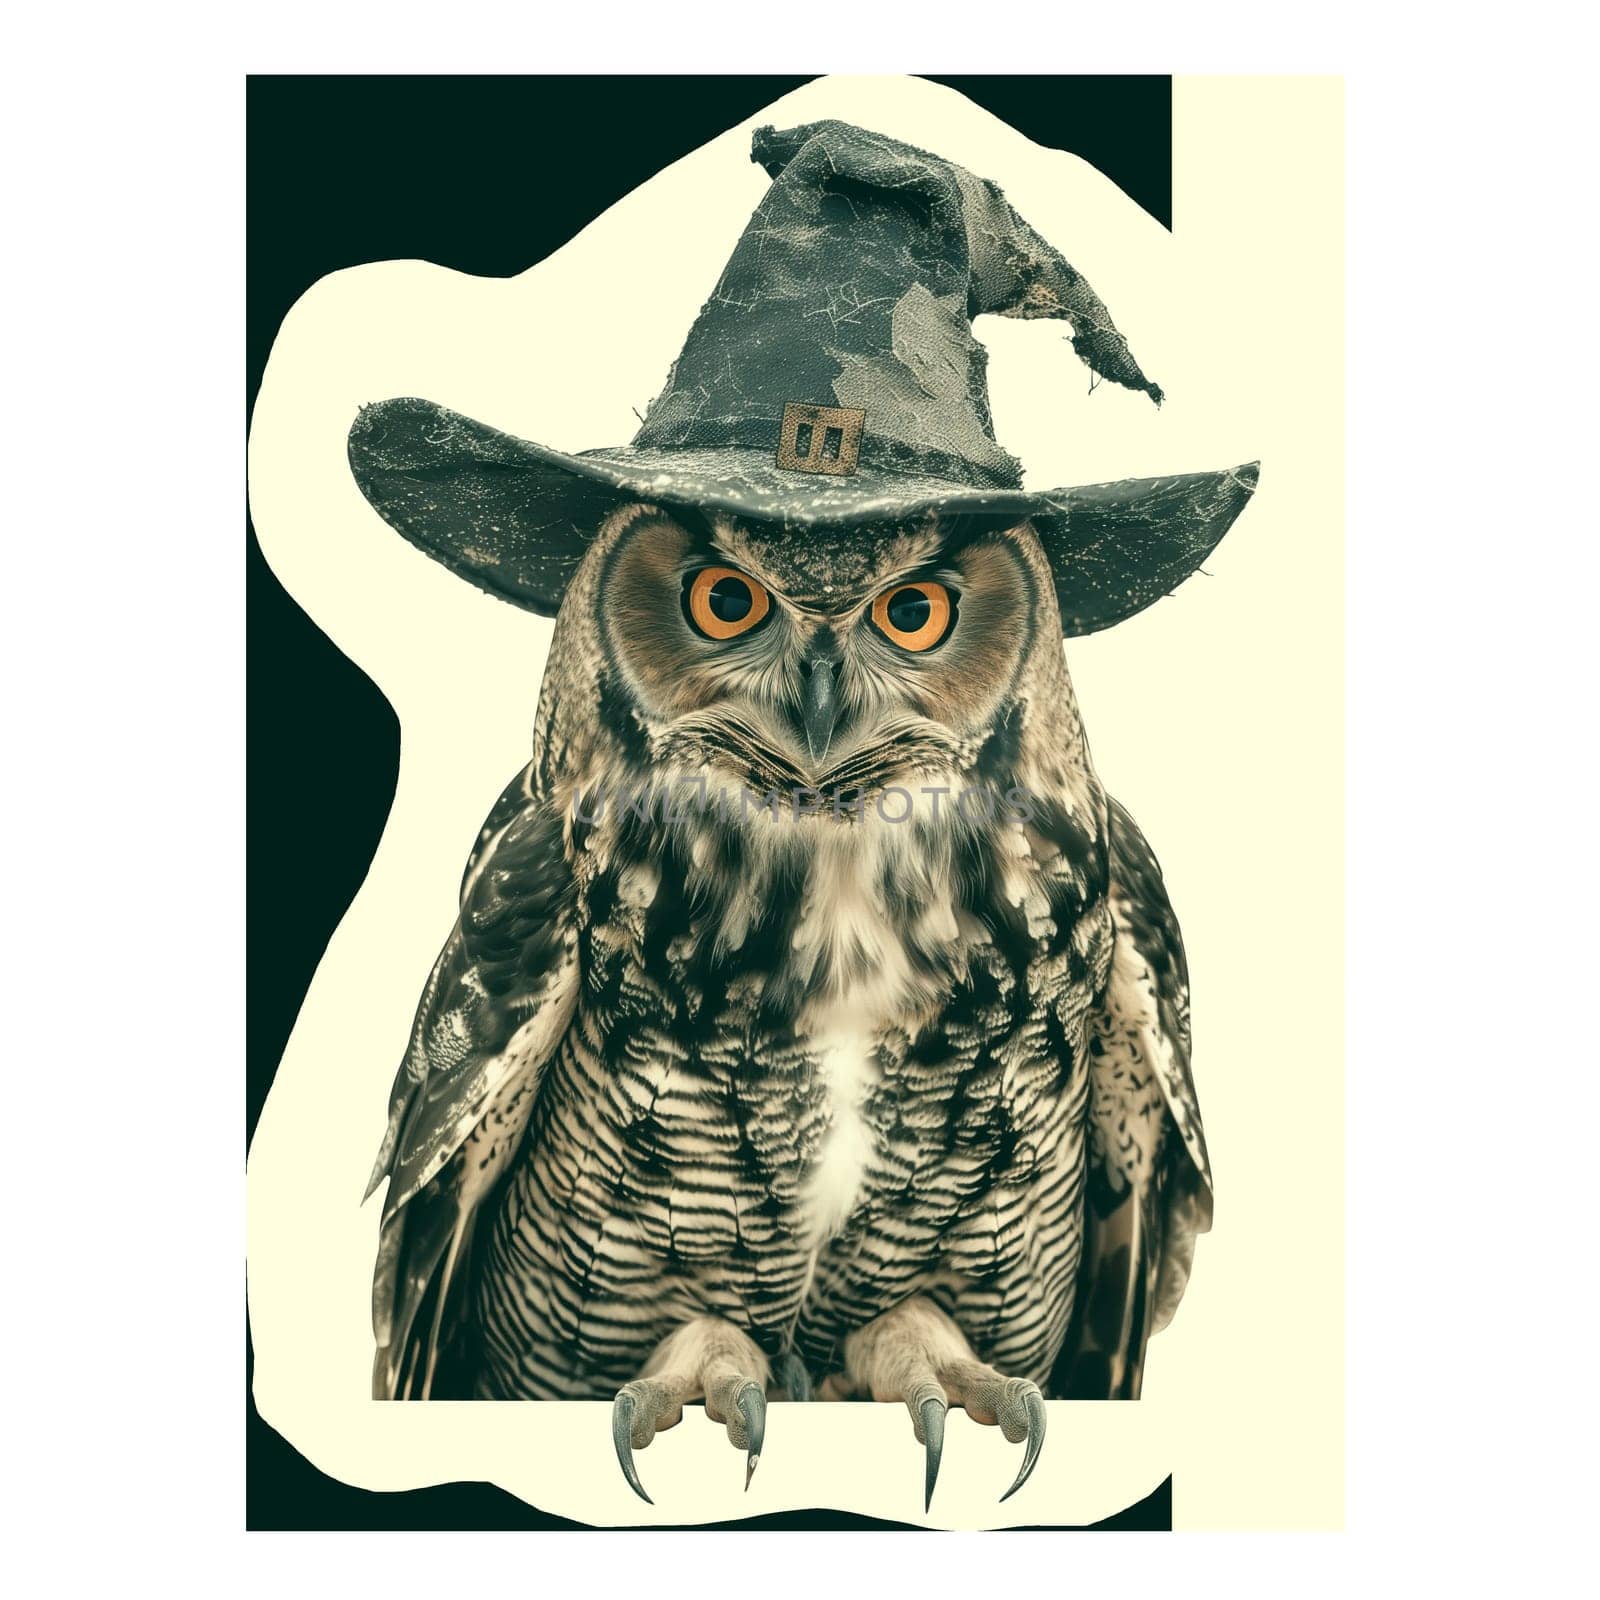 Cut out faded photo of halloween owl with hat by Dustick